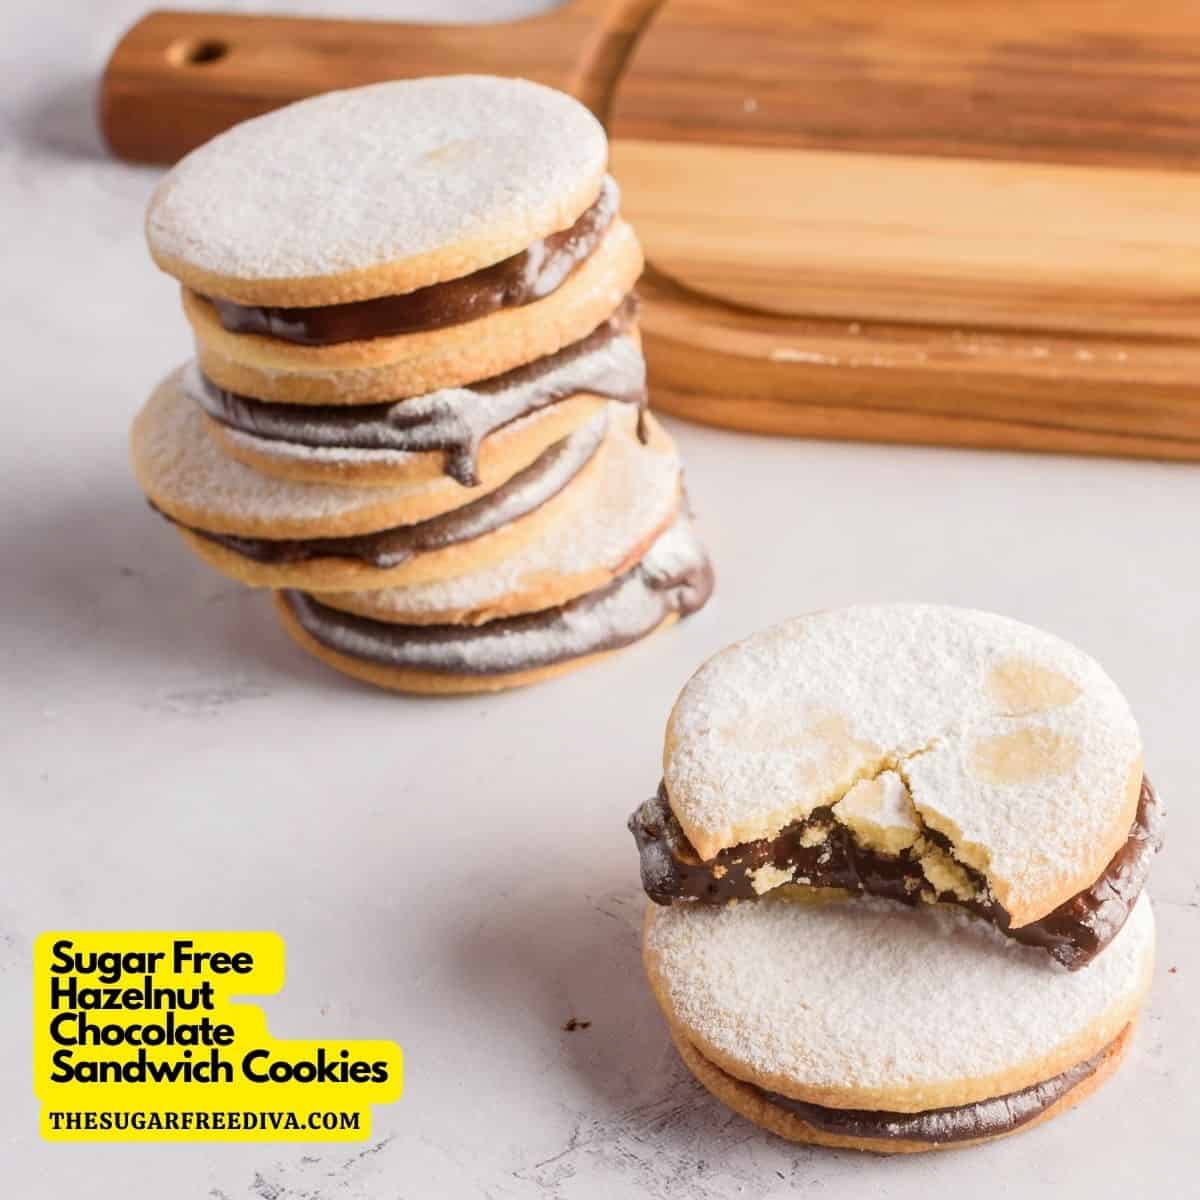 Sugar Free Hazelnut Chocolate Sandwich Cookies, a delicious dessert or snack recipe made with no added sugar. Keto, Low Carb, GF Diet.